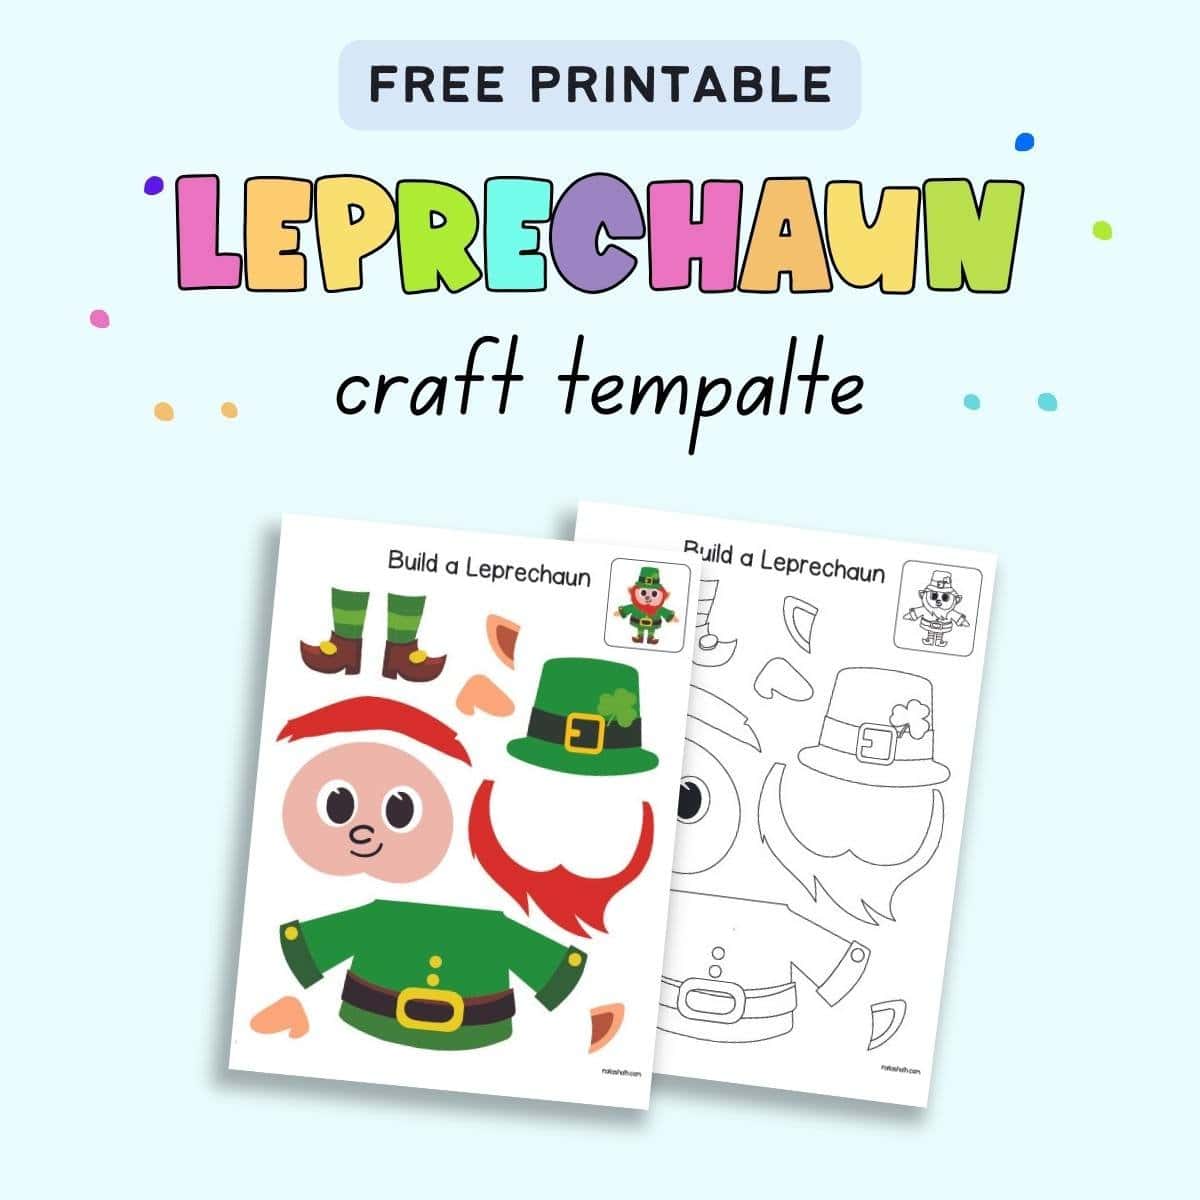 Text "free printable leprechaun craft template" with a preview of a color leprechaun cut and paste craft and one in black and white